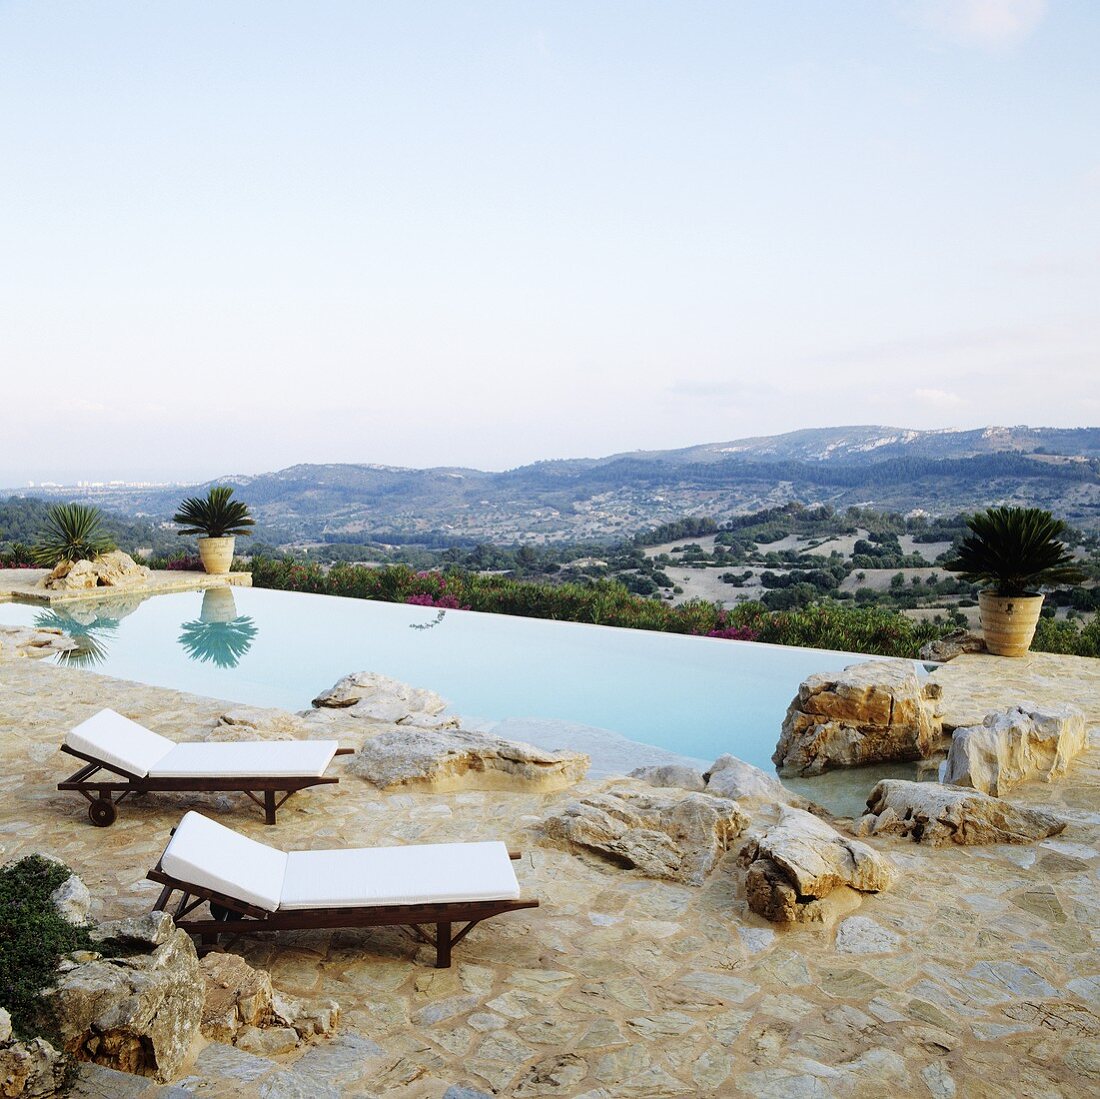 Loungers on a natural stone floor by a pool with a view of the Spanish landscape